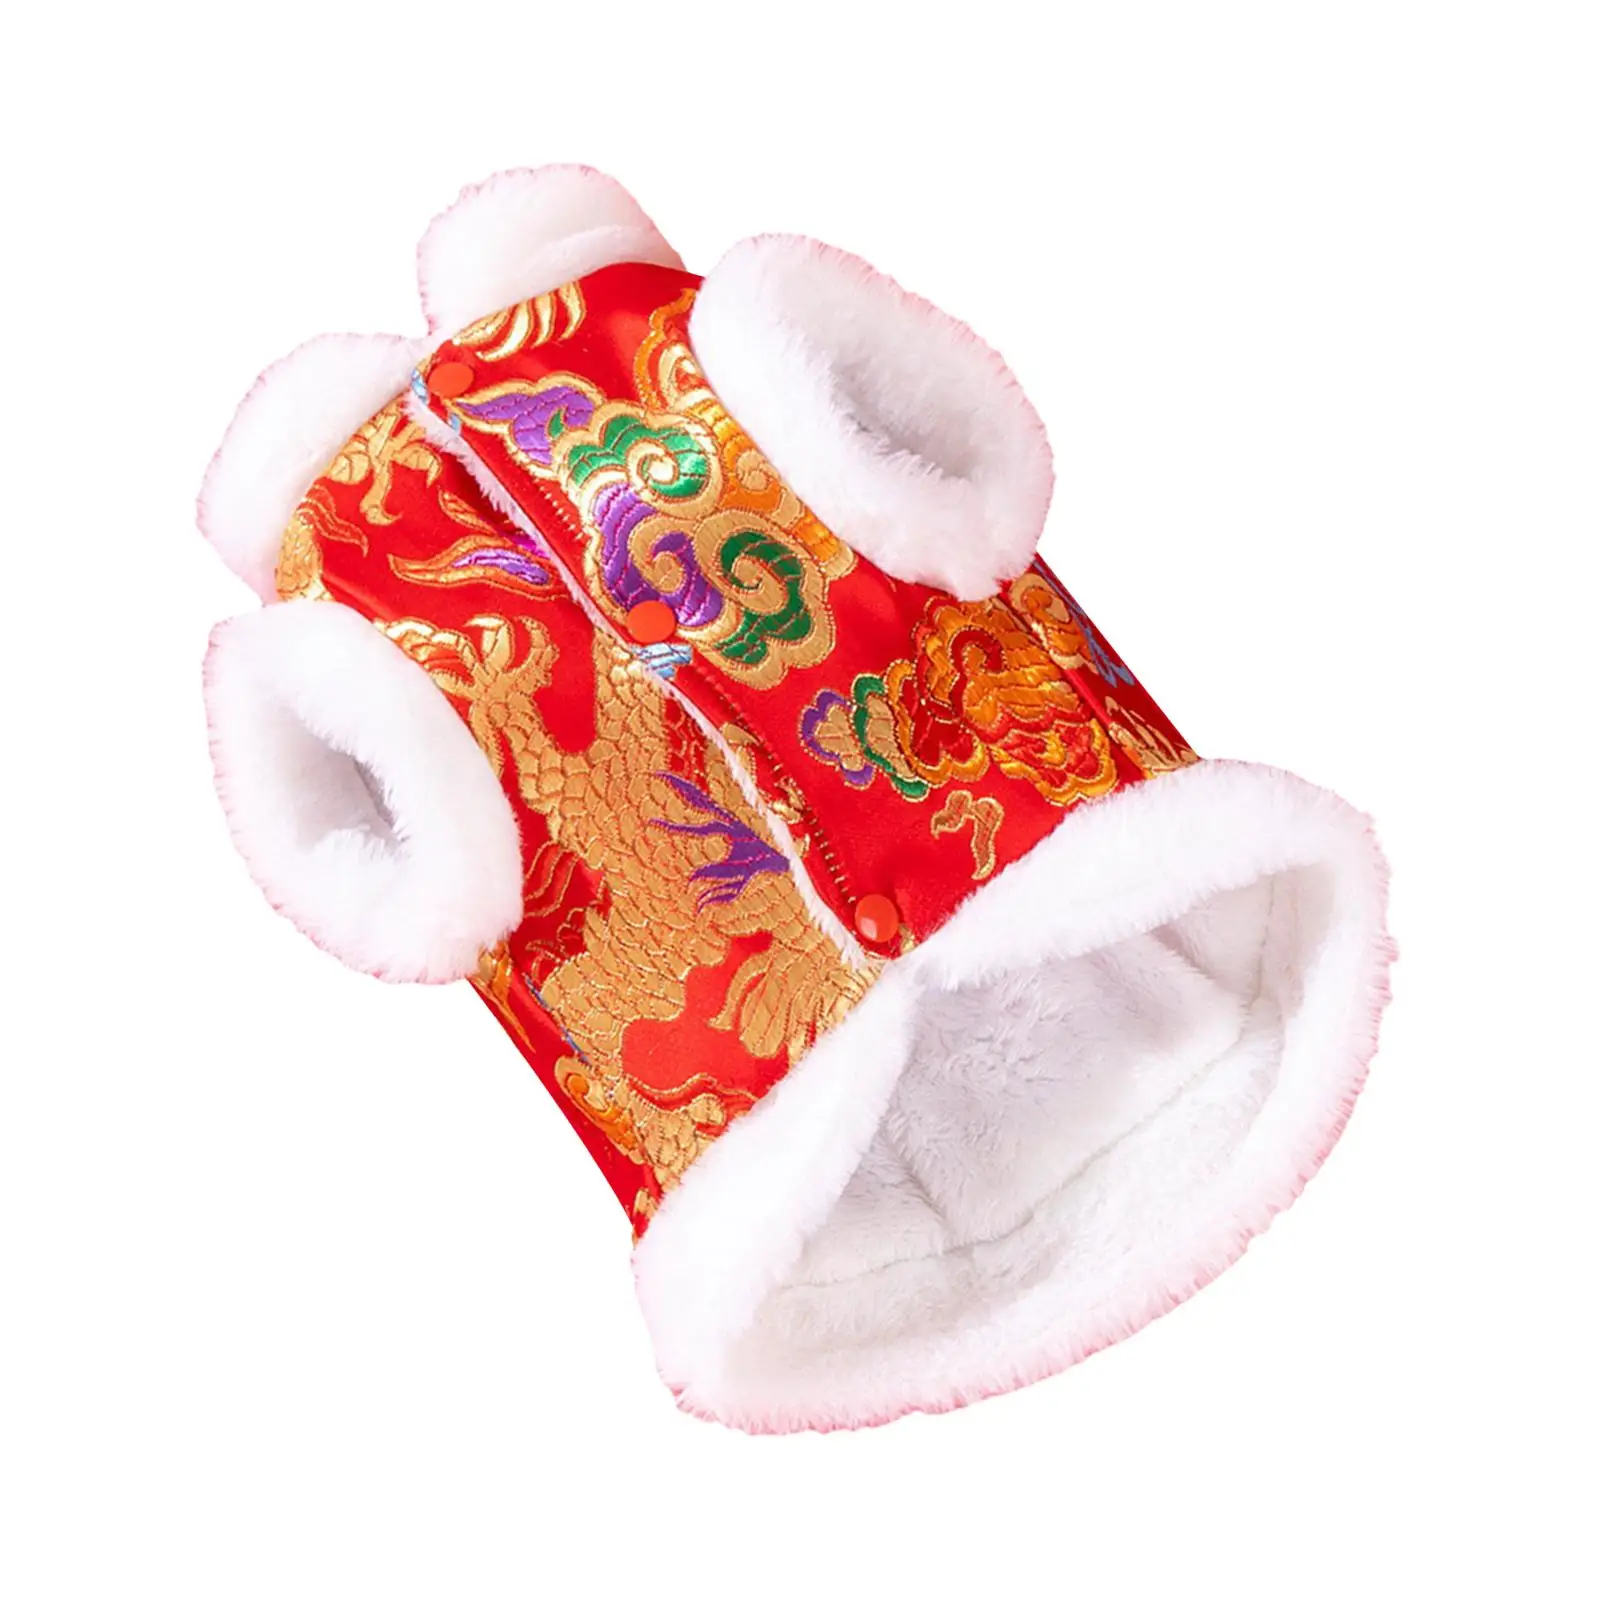 Dog Chinese New Year Costume Winter Coat Costume Accessory New Year Dog Dragon Robe Winter Pet Clothes for Puppy Small Dogs Pets